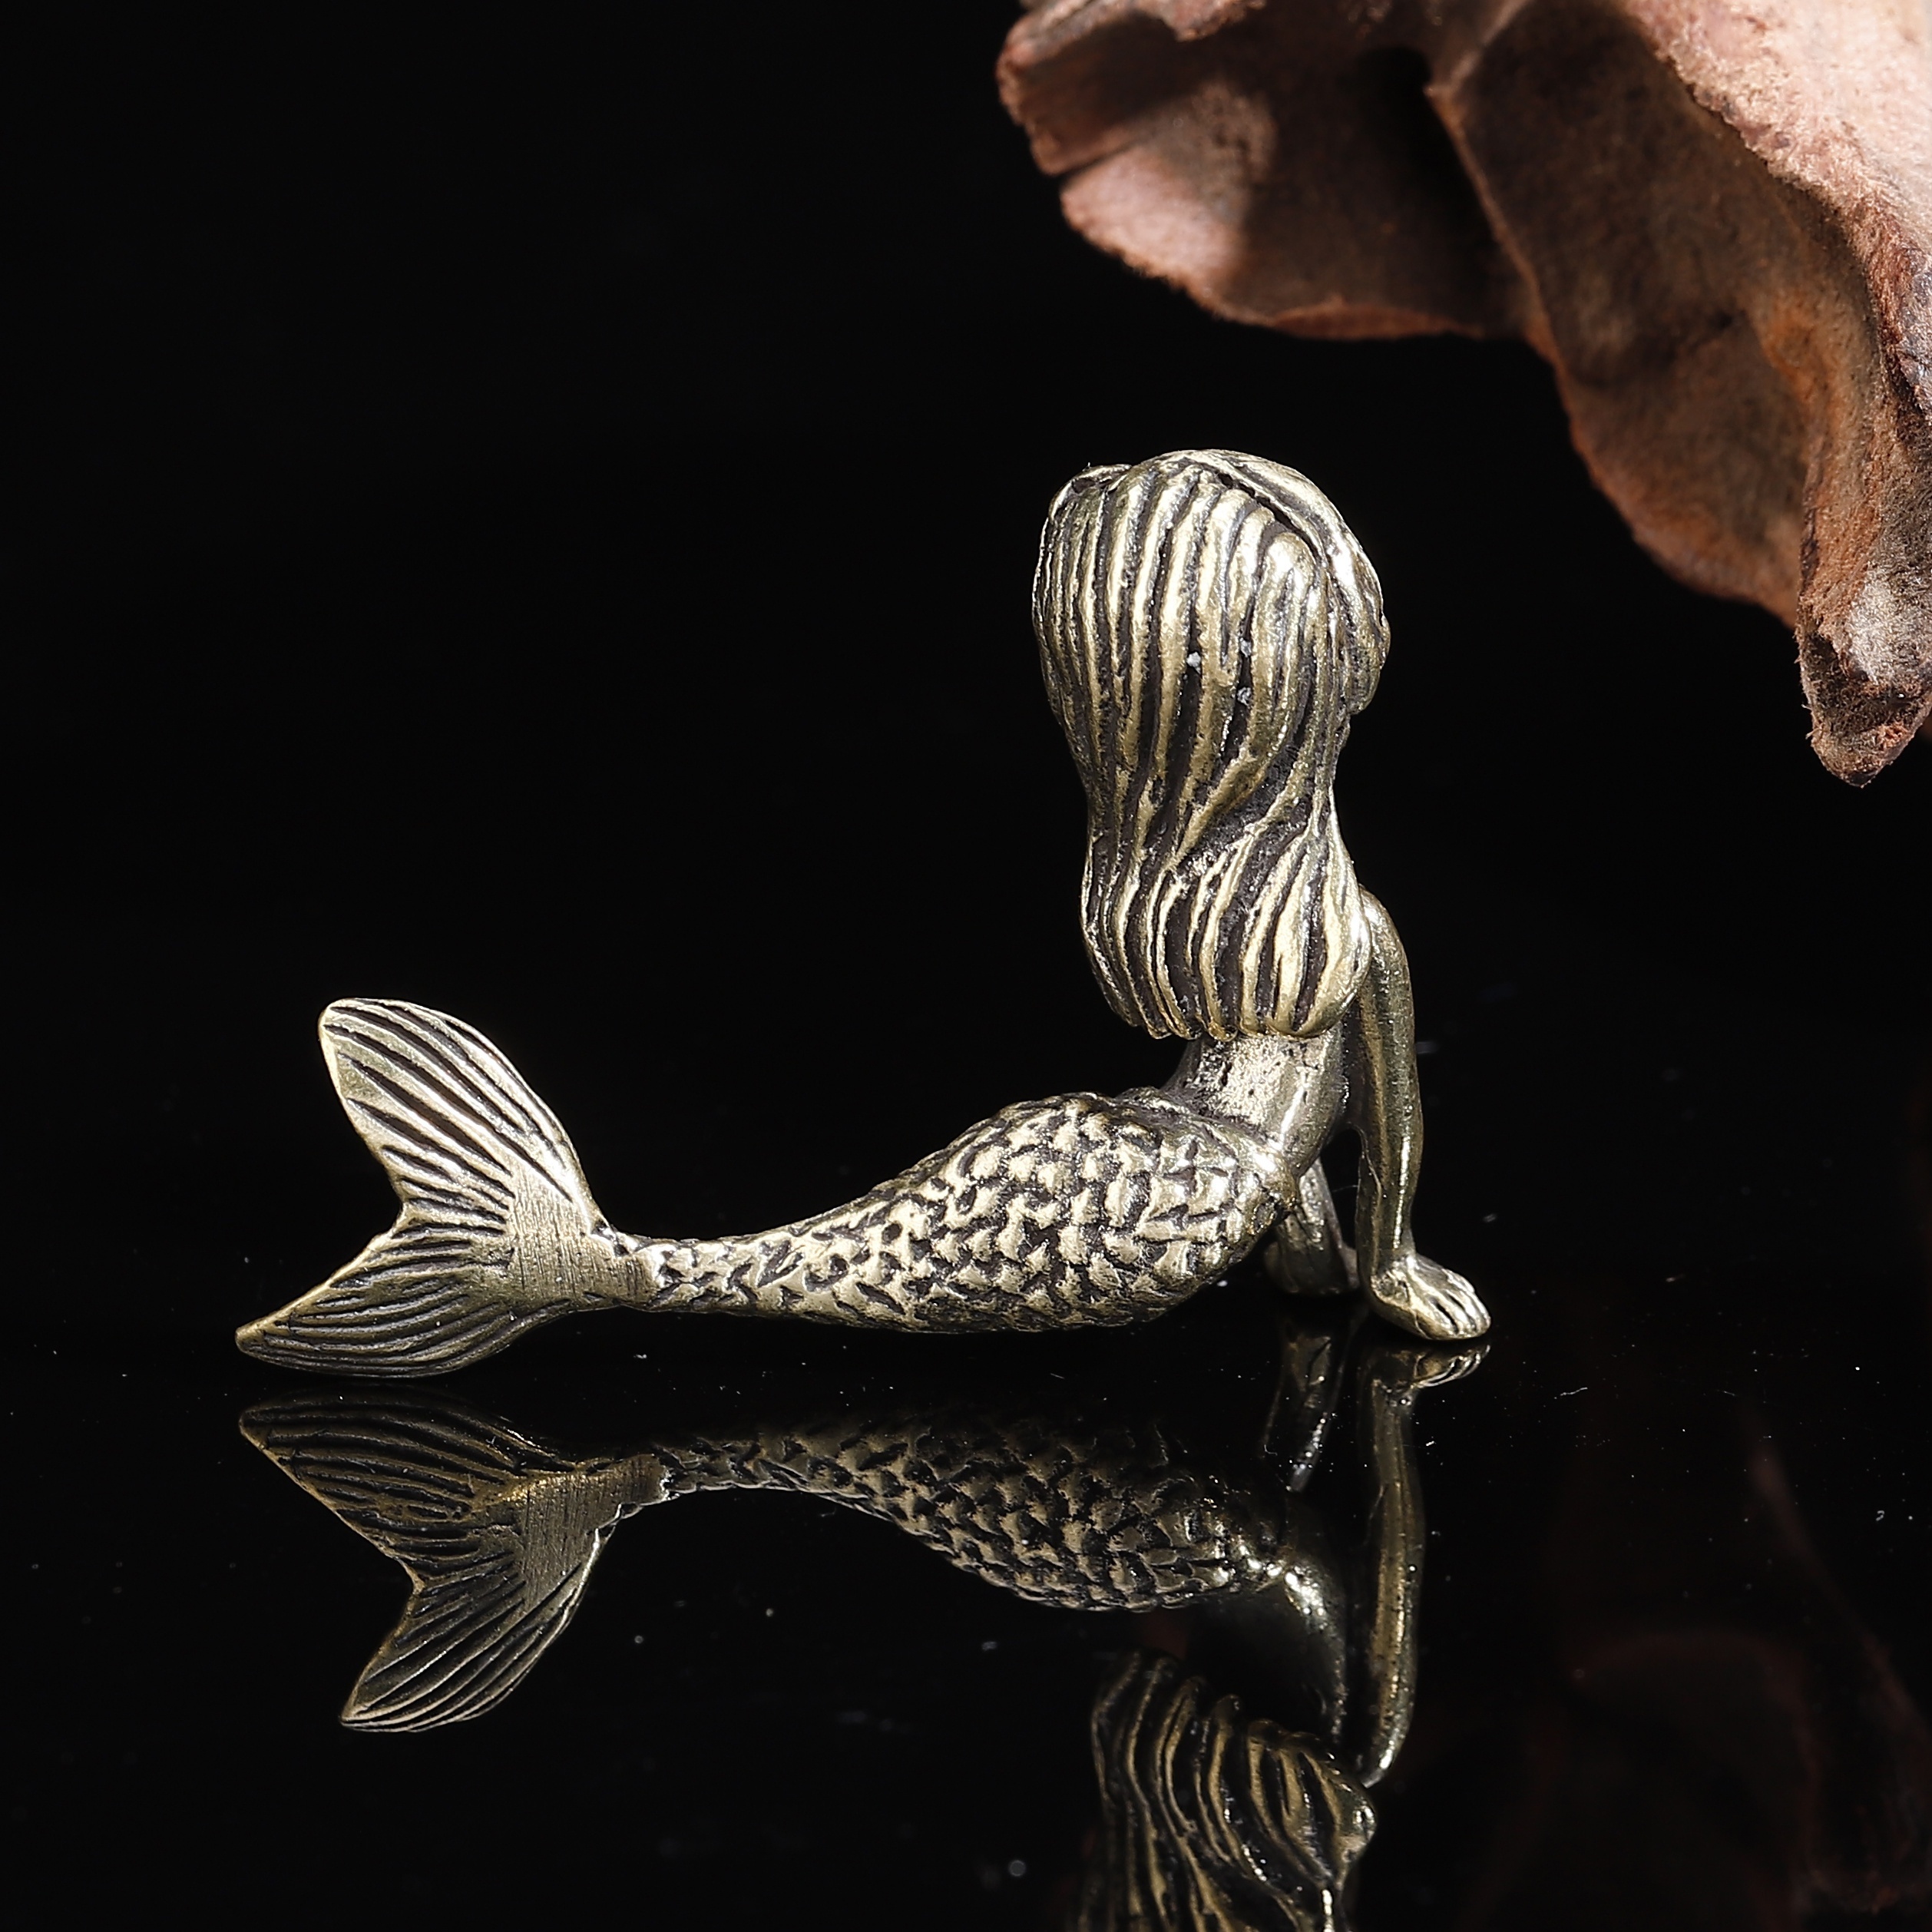 Solid Brass Fish Figurine Small Statue Home Ornaments Animal Figurines Gift